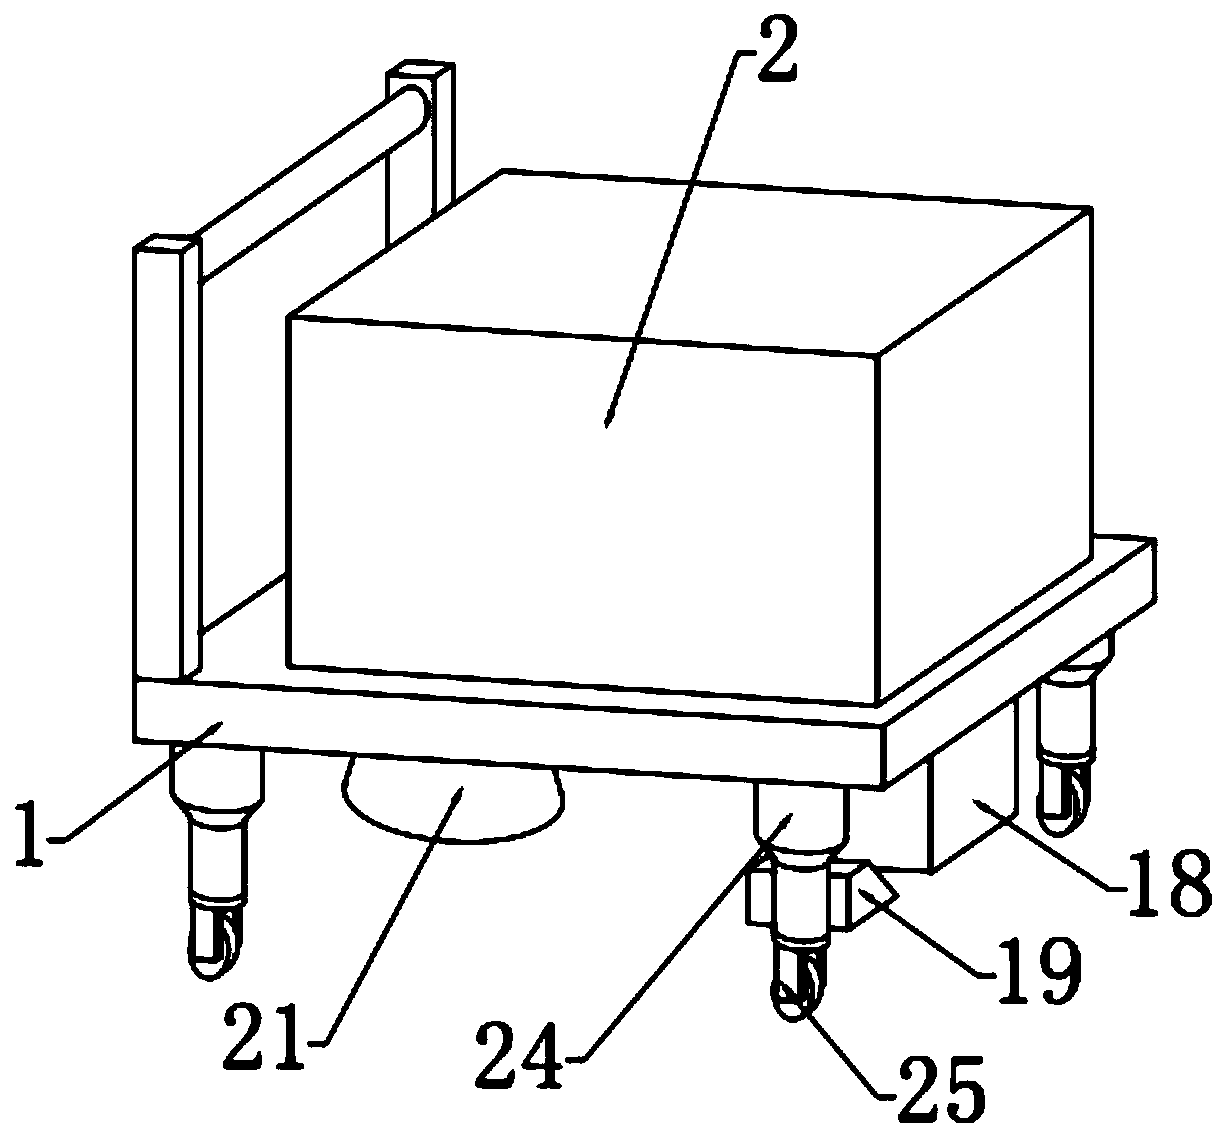 Ground surface dressing device for building construction